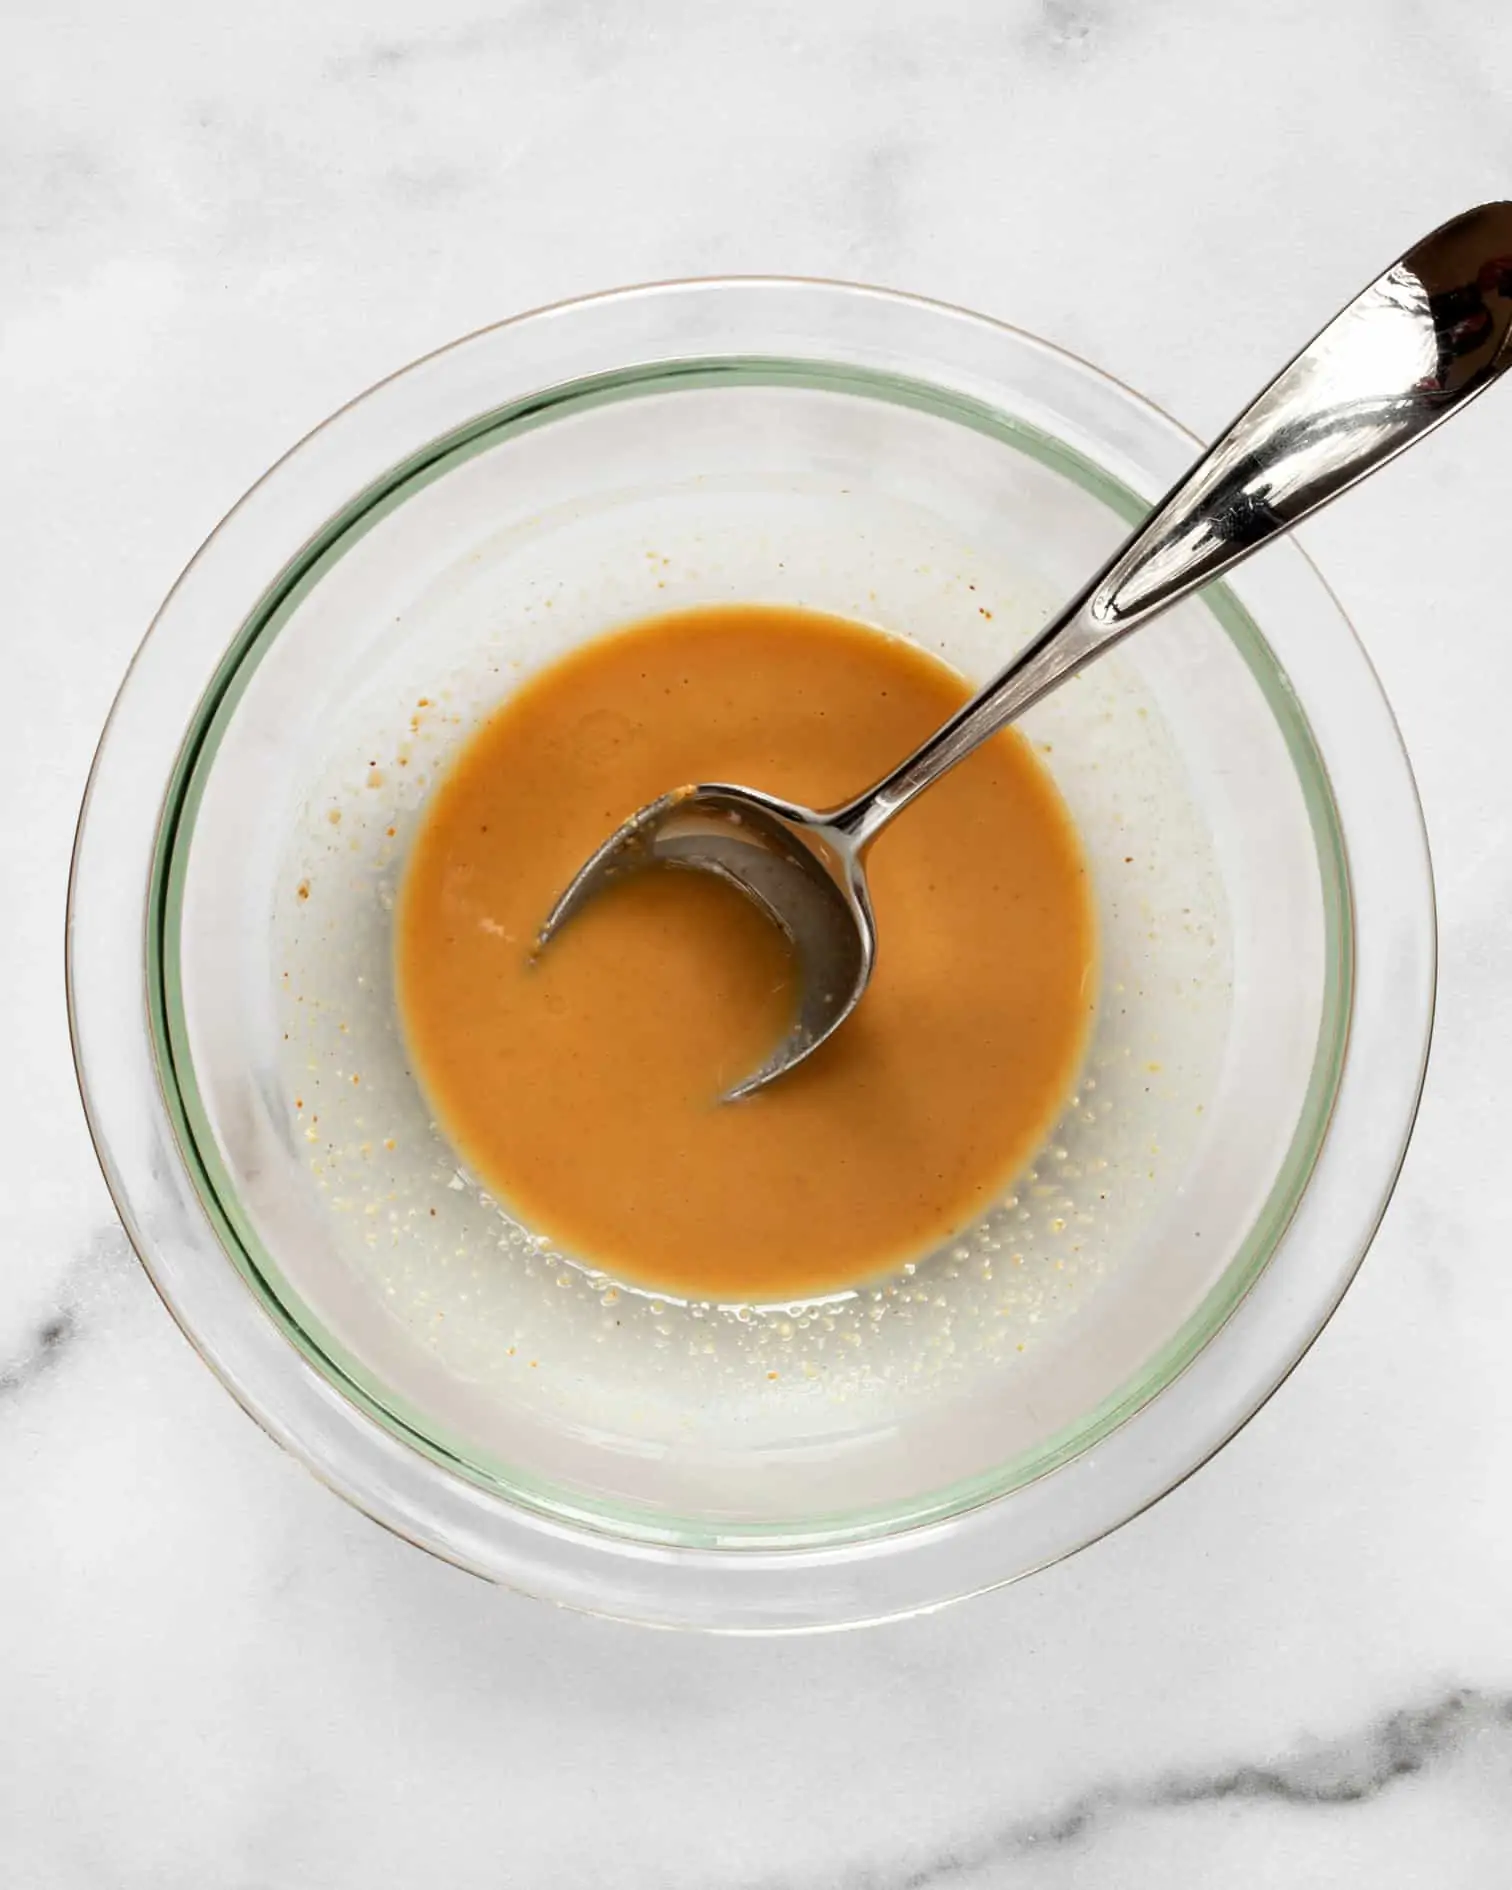 Stir together the melted coconut oil and peanut butter